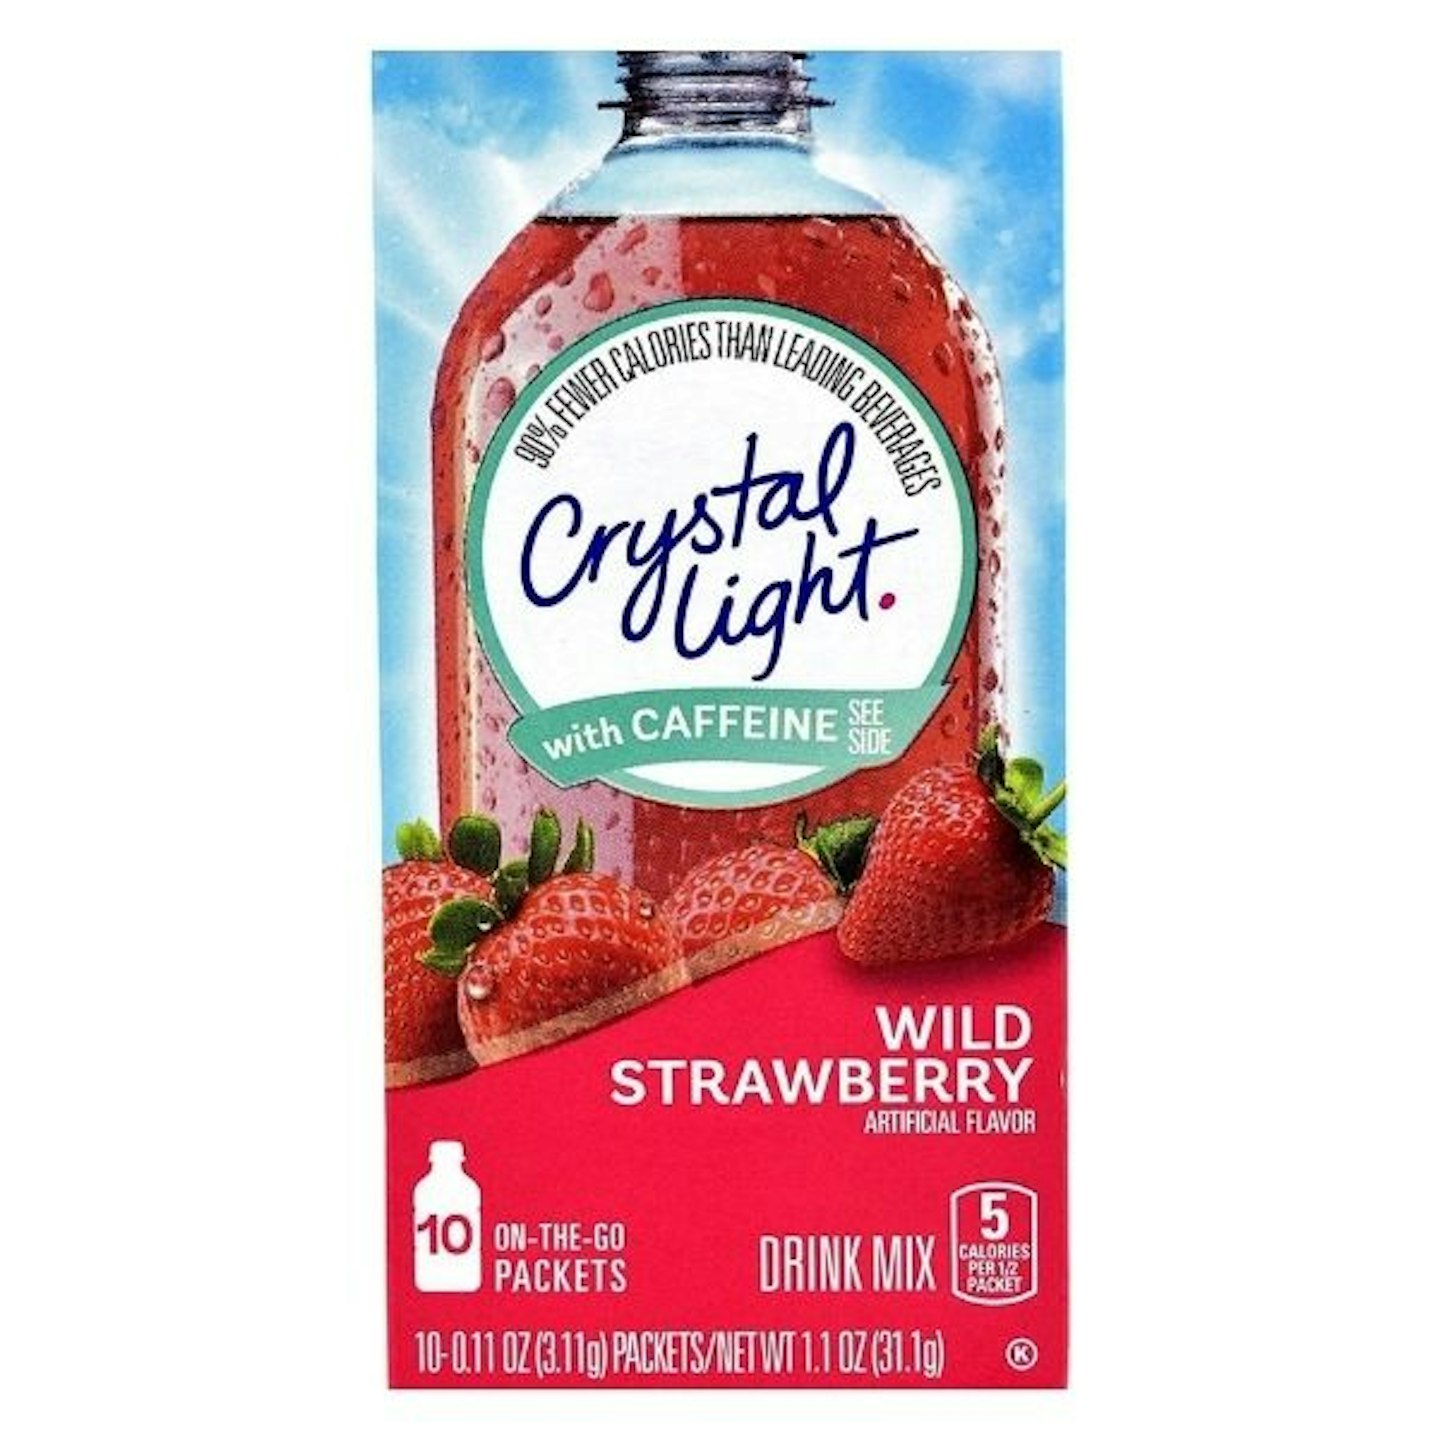 Crystal Light Wild Strawberry with Caffeine On The Go Drink Mix